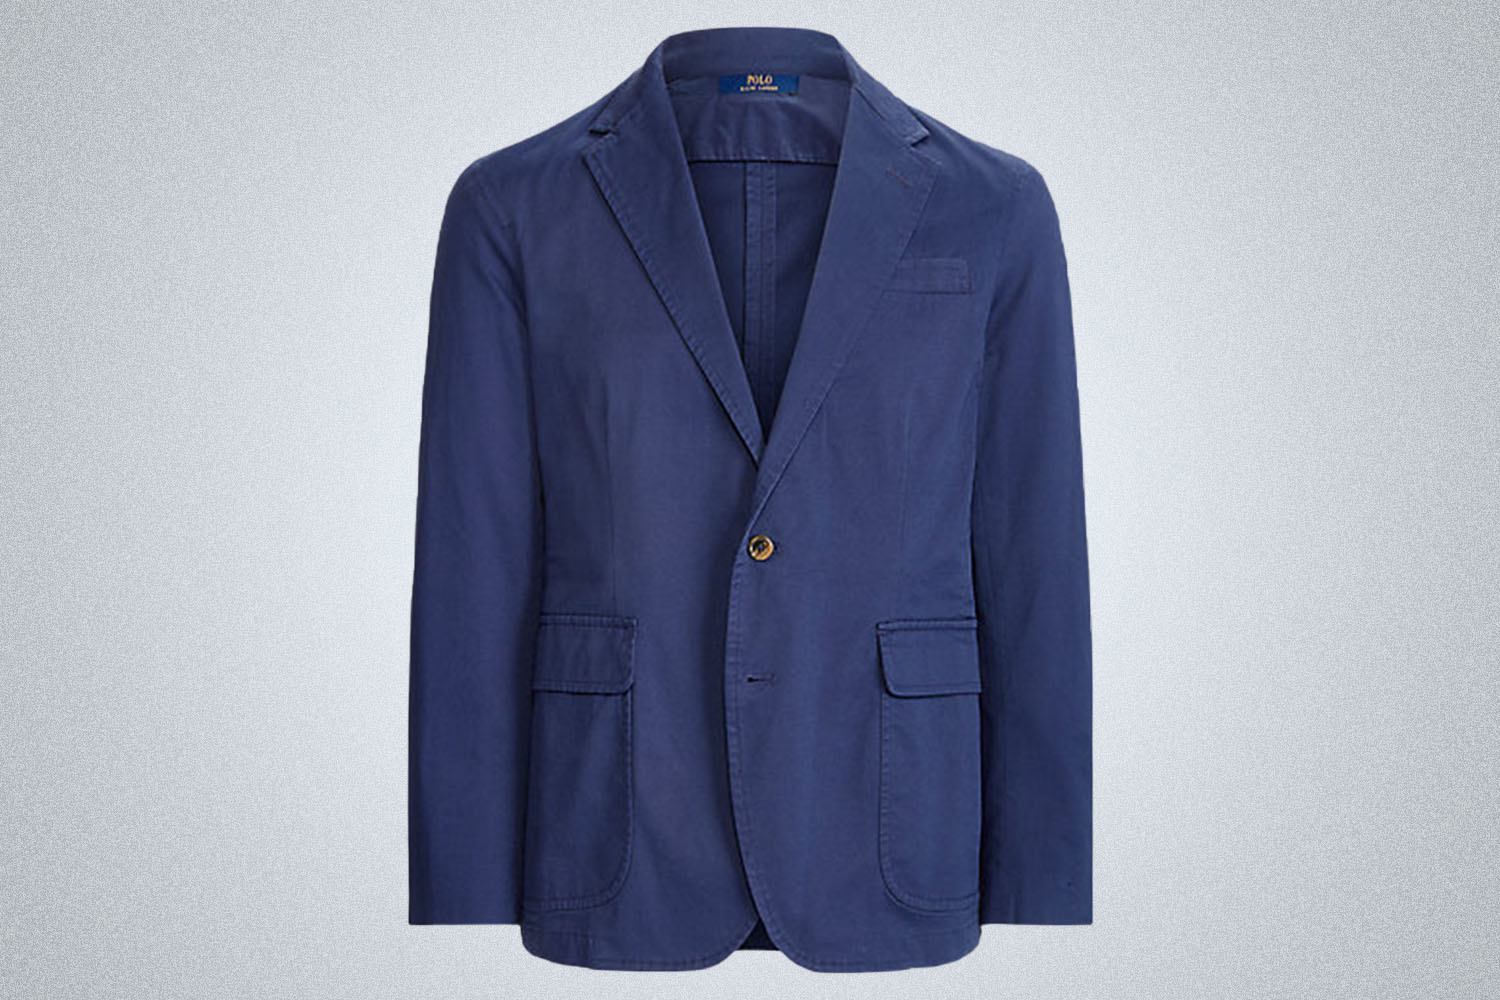 a blue chino blazer from Polo Ralph Lauren on grey background